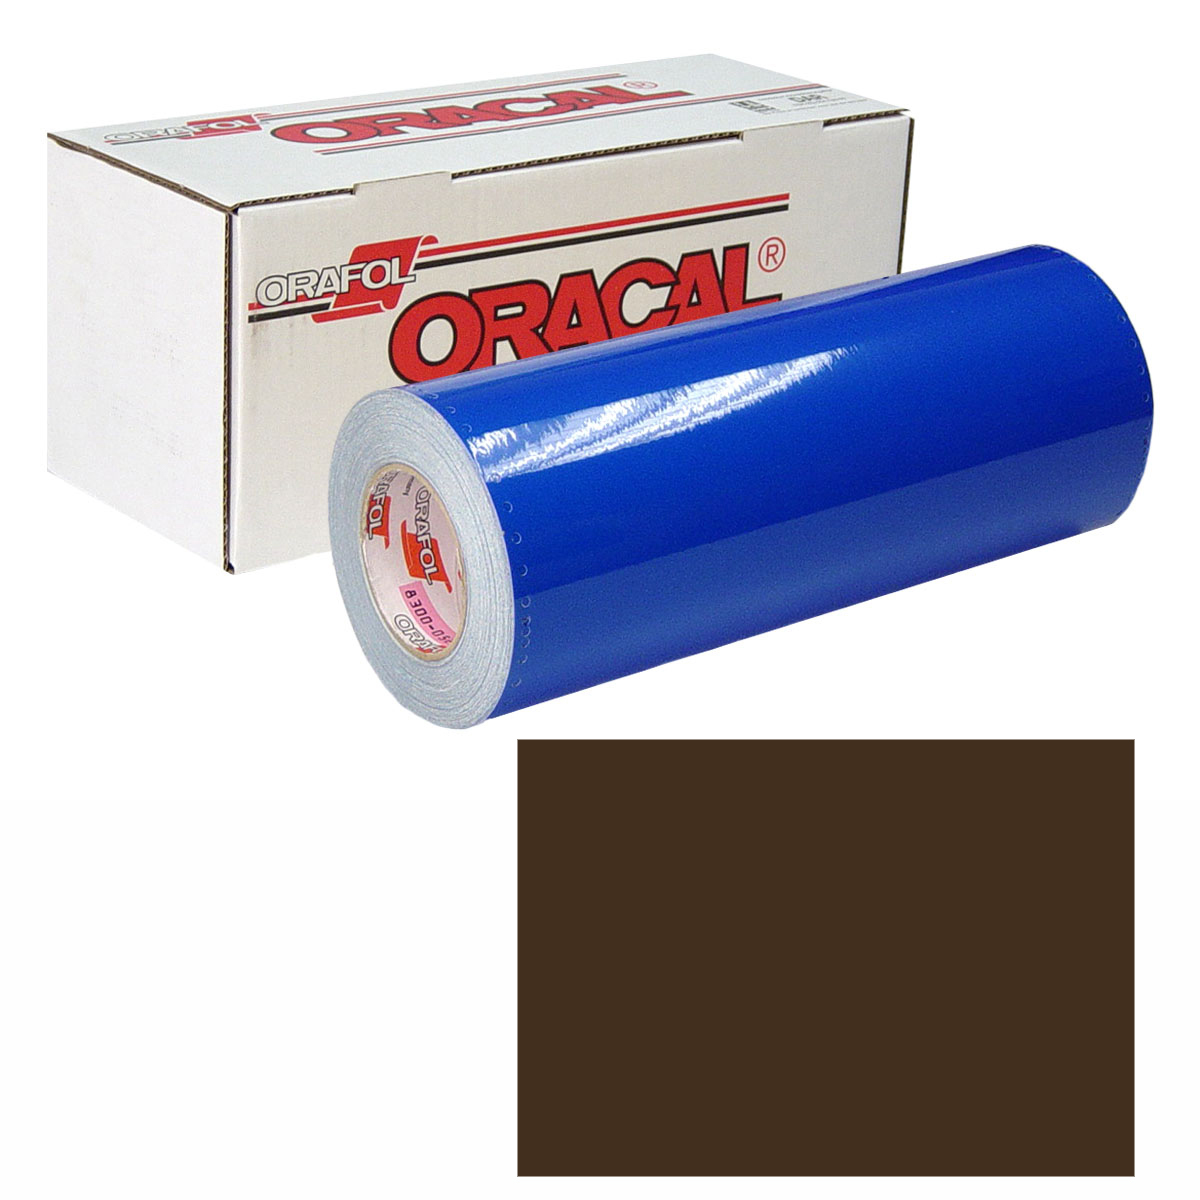 ORACAL 631 15in X 50yd 080 Brown